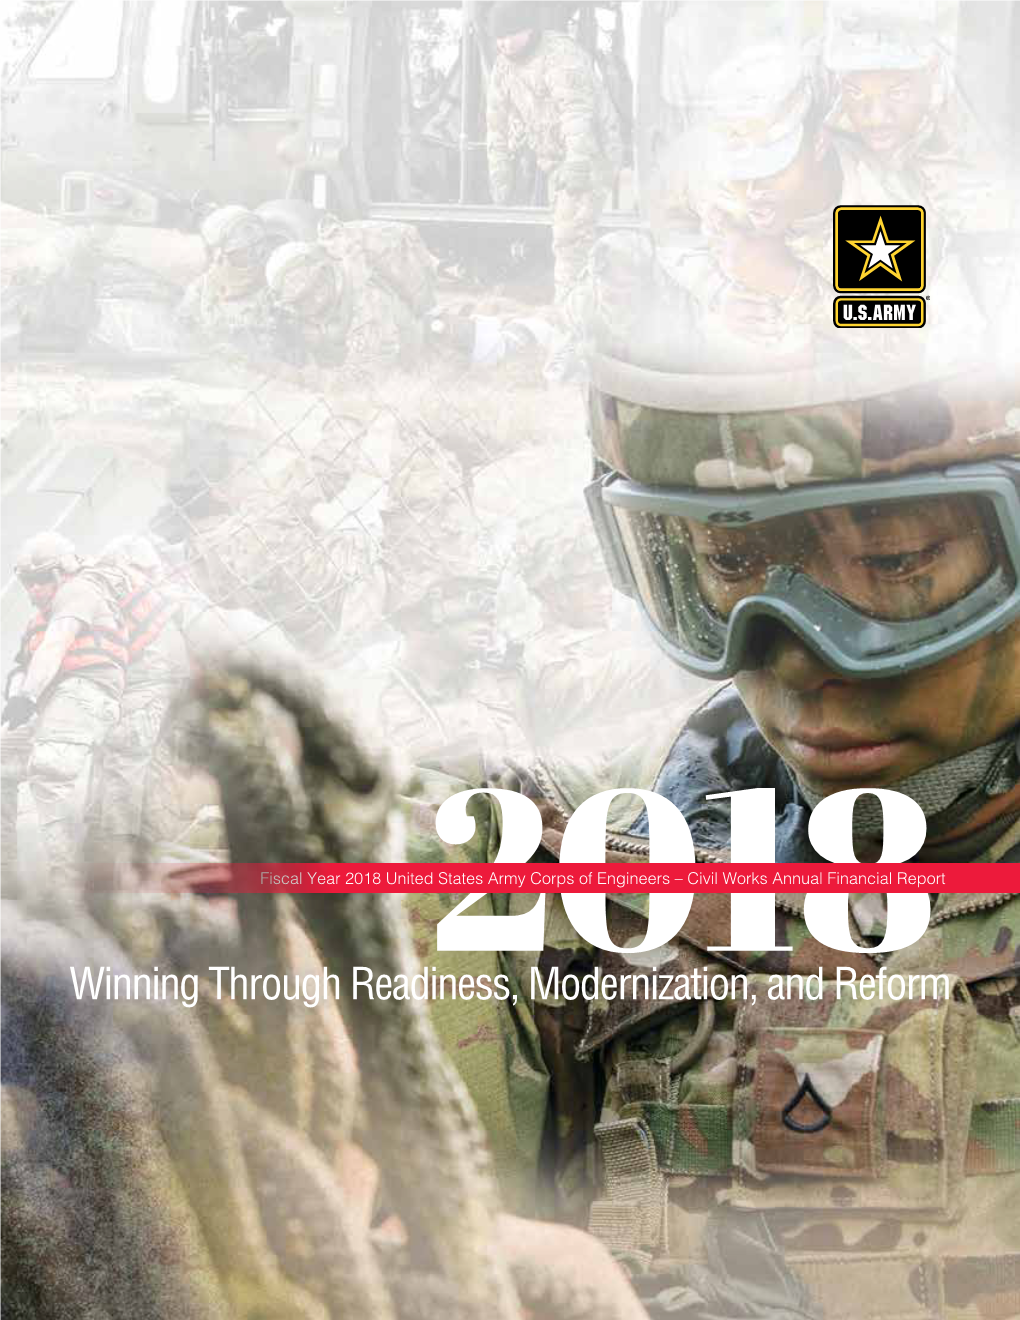 FY 2018 U.S. Army Corps of Engineers Annual Financial Report